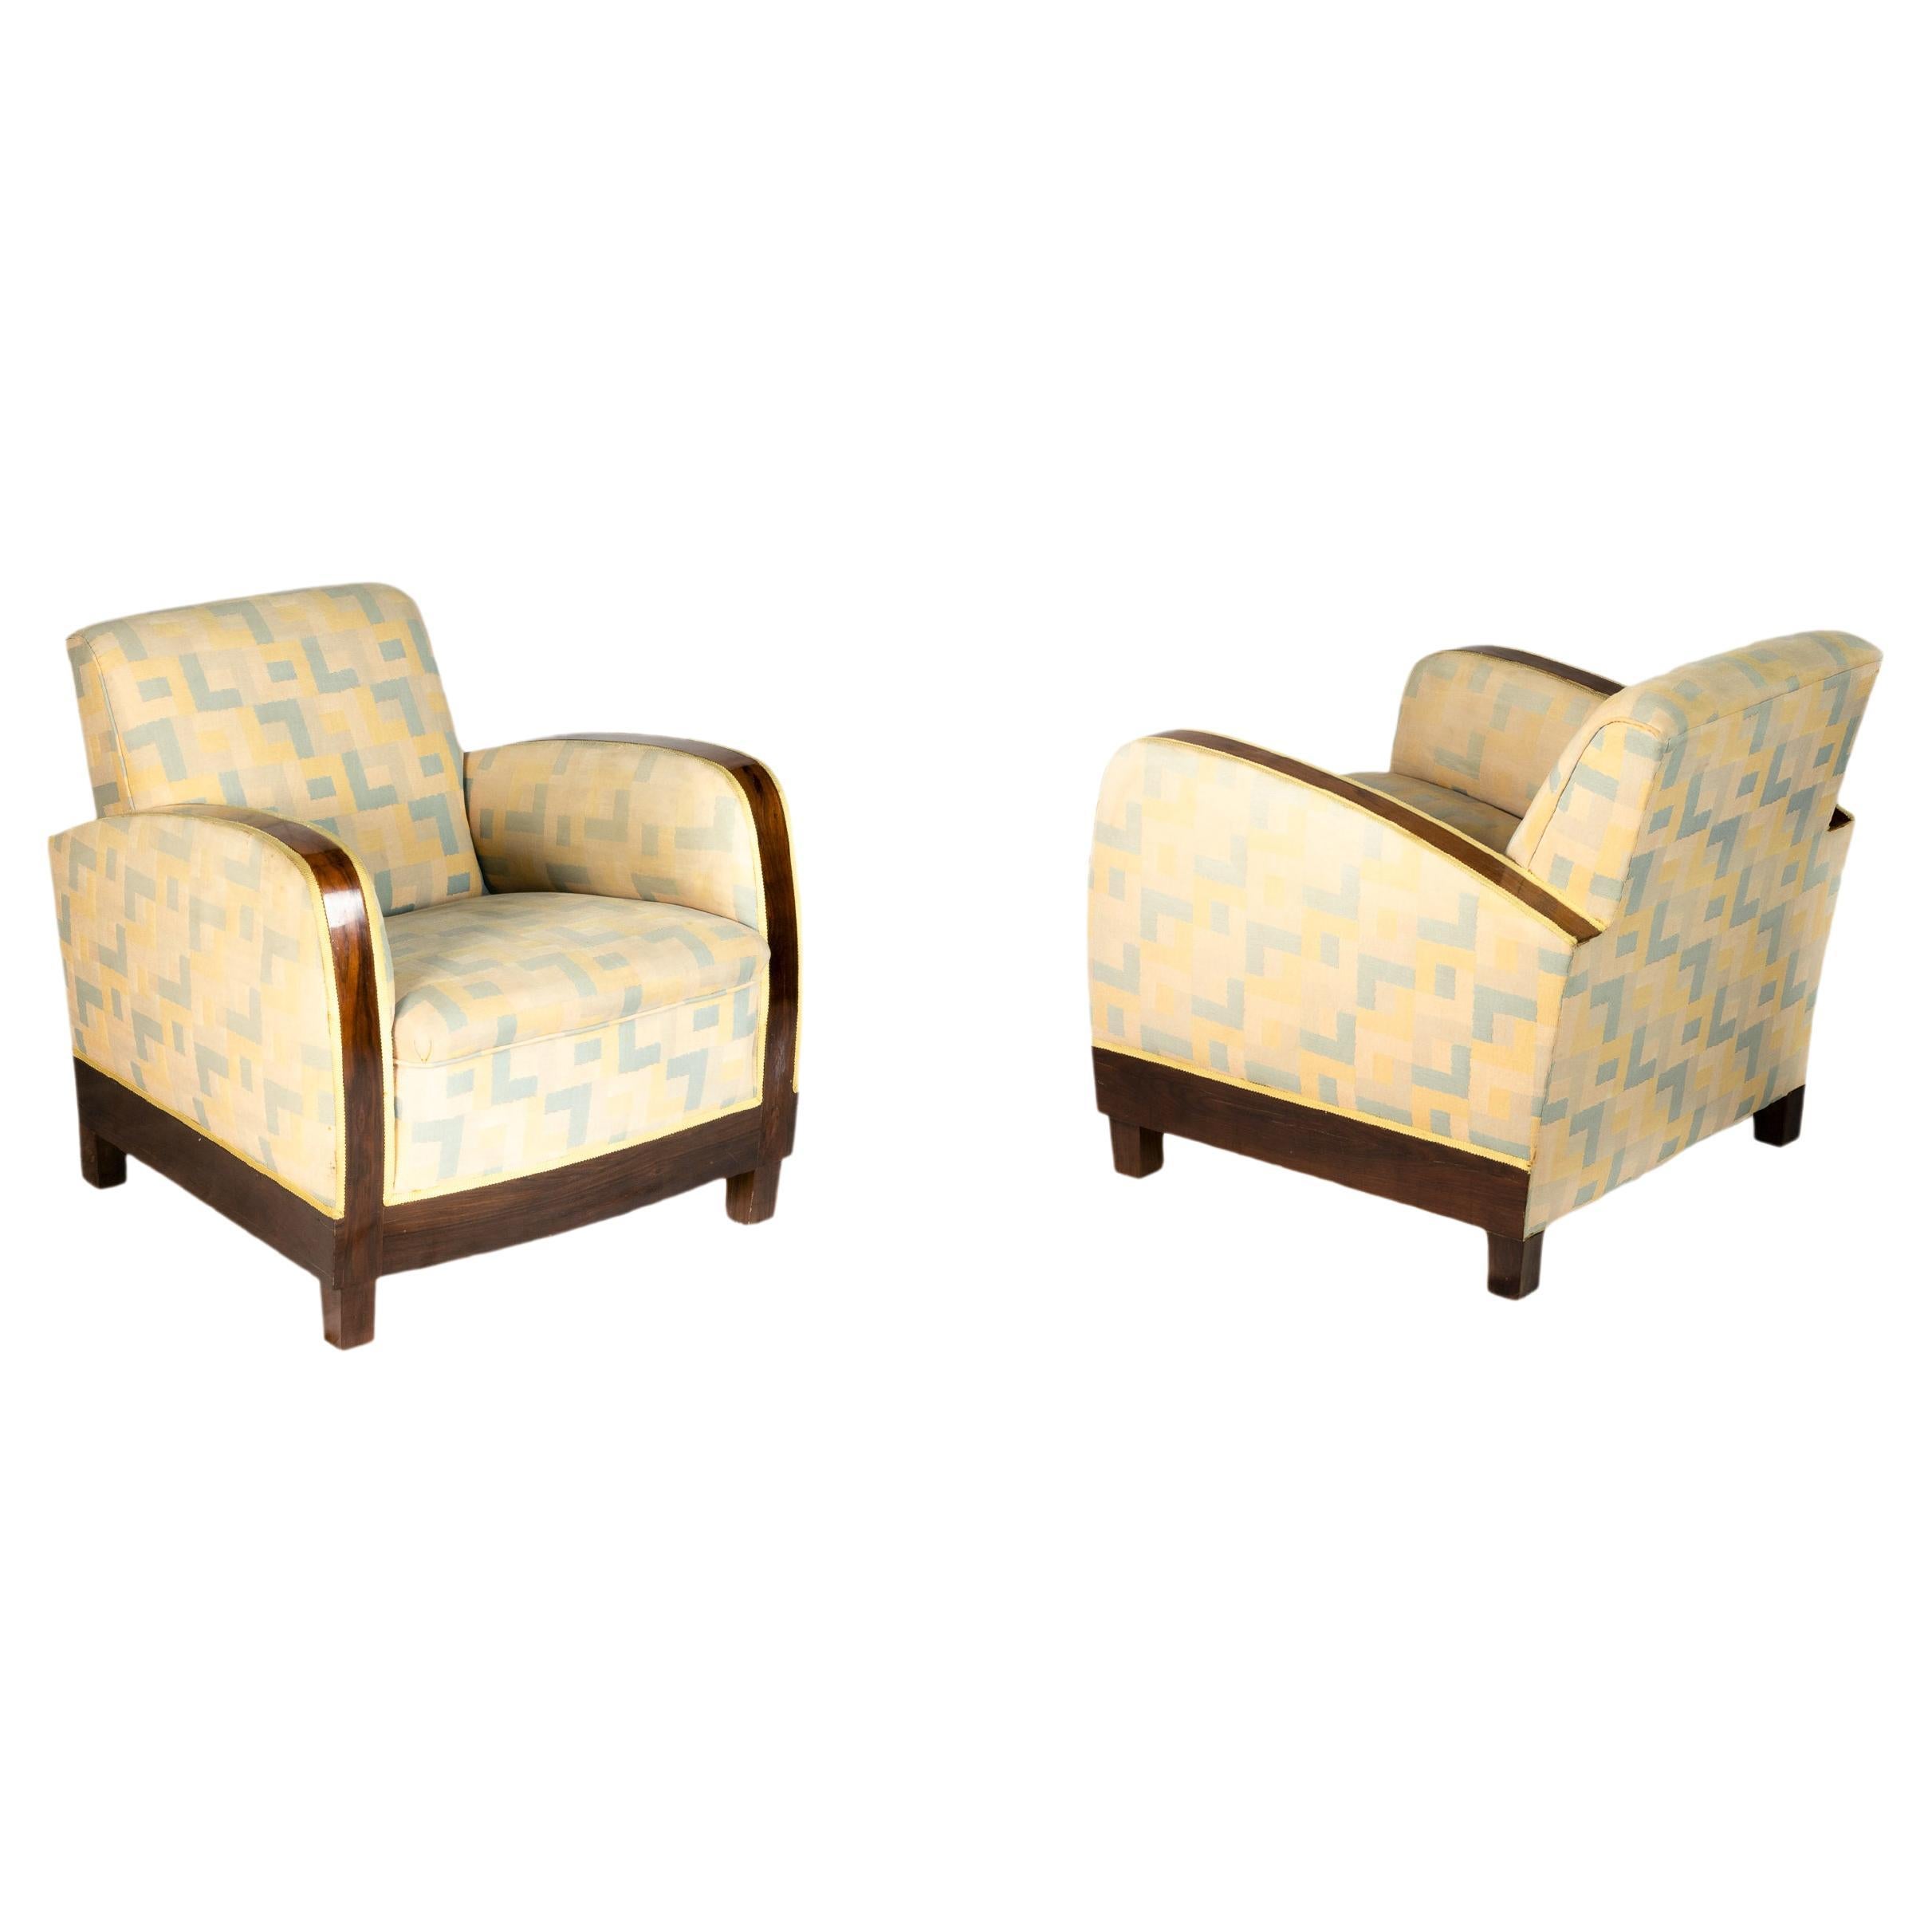 Pair of Art Deco Armchairs, 20th Century For Sale